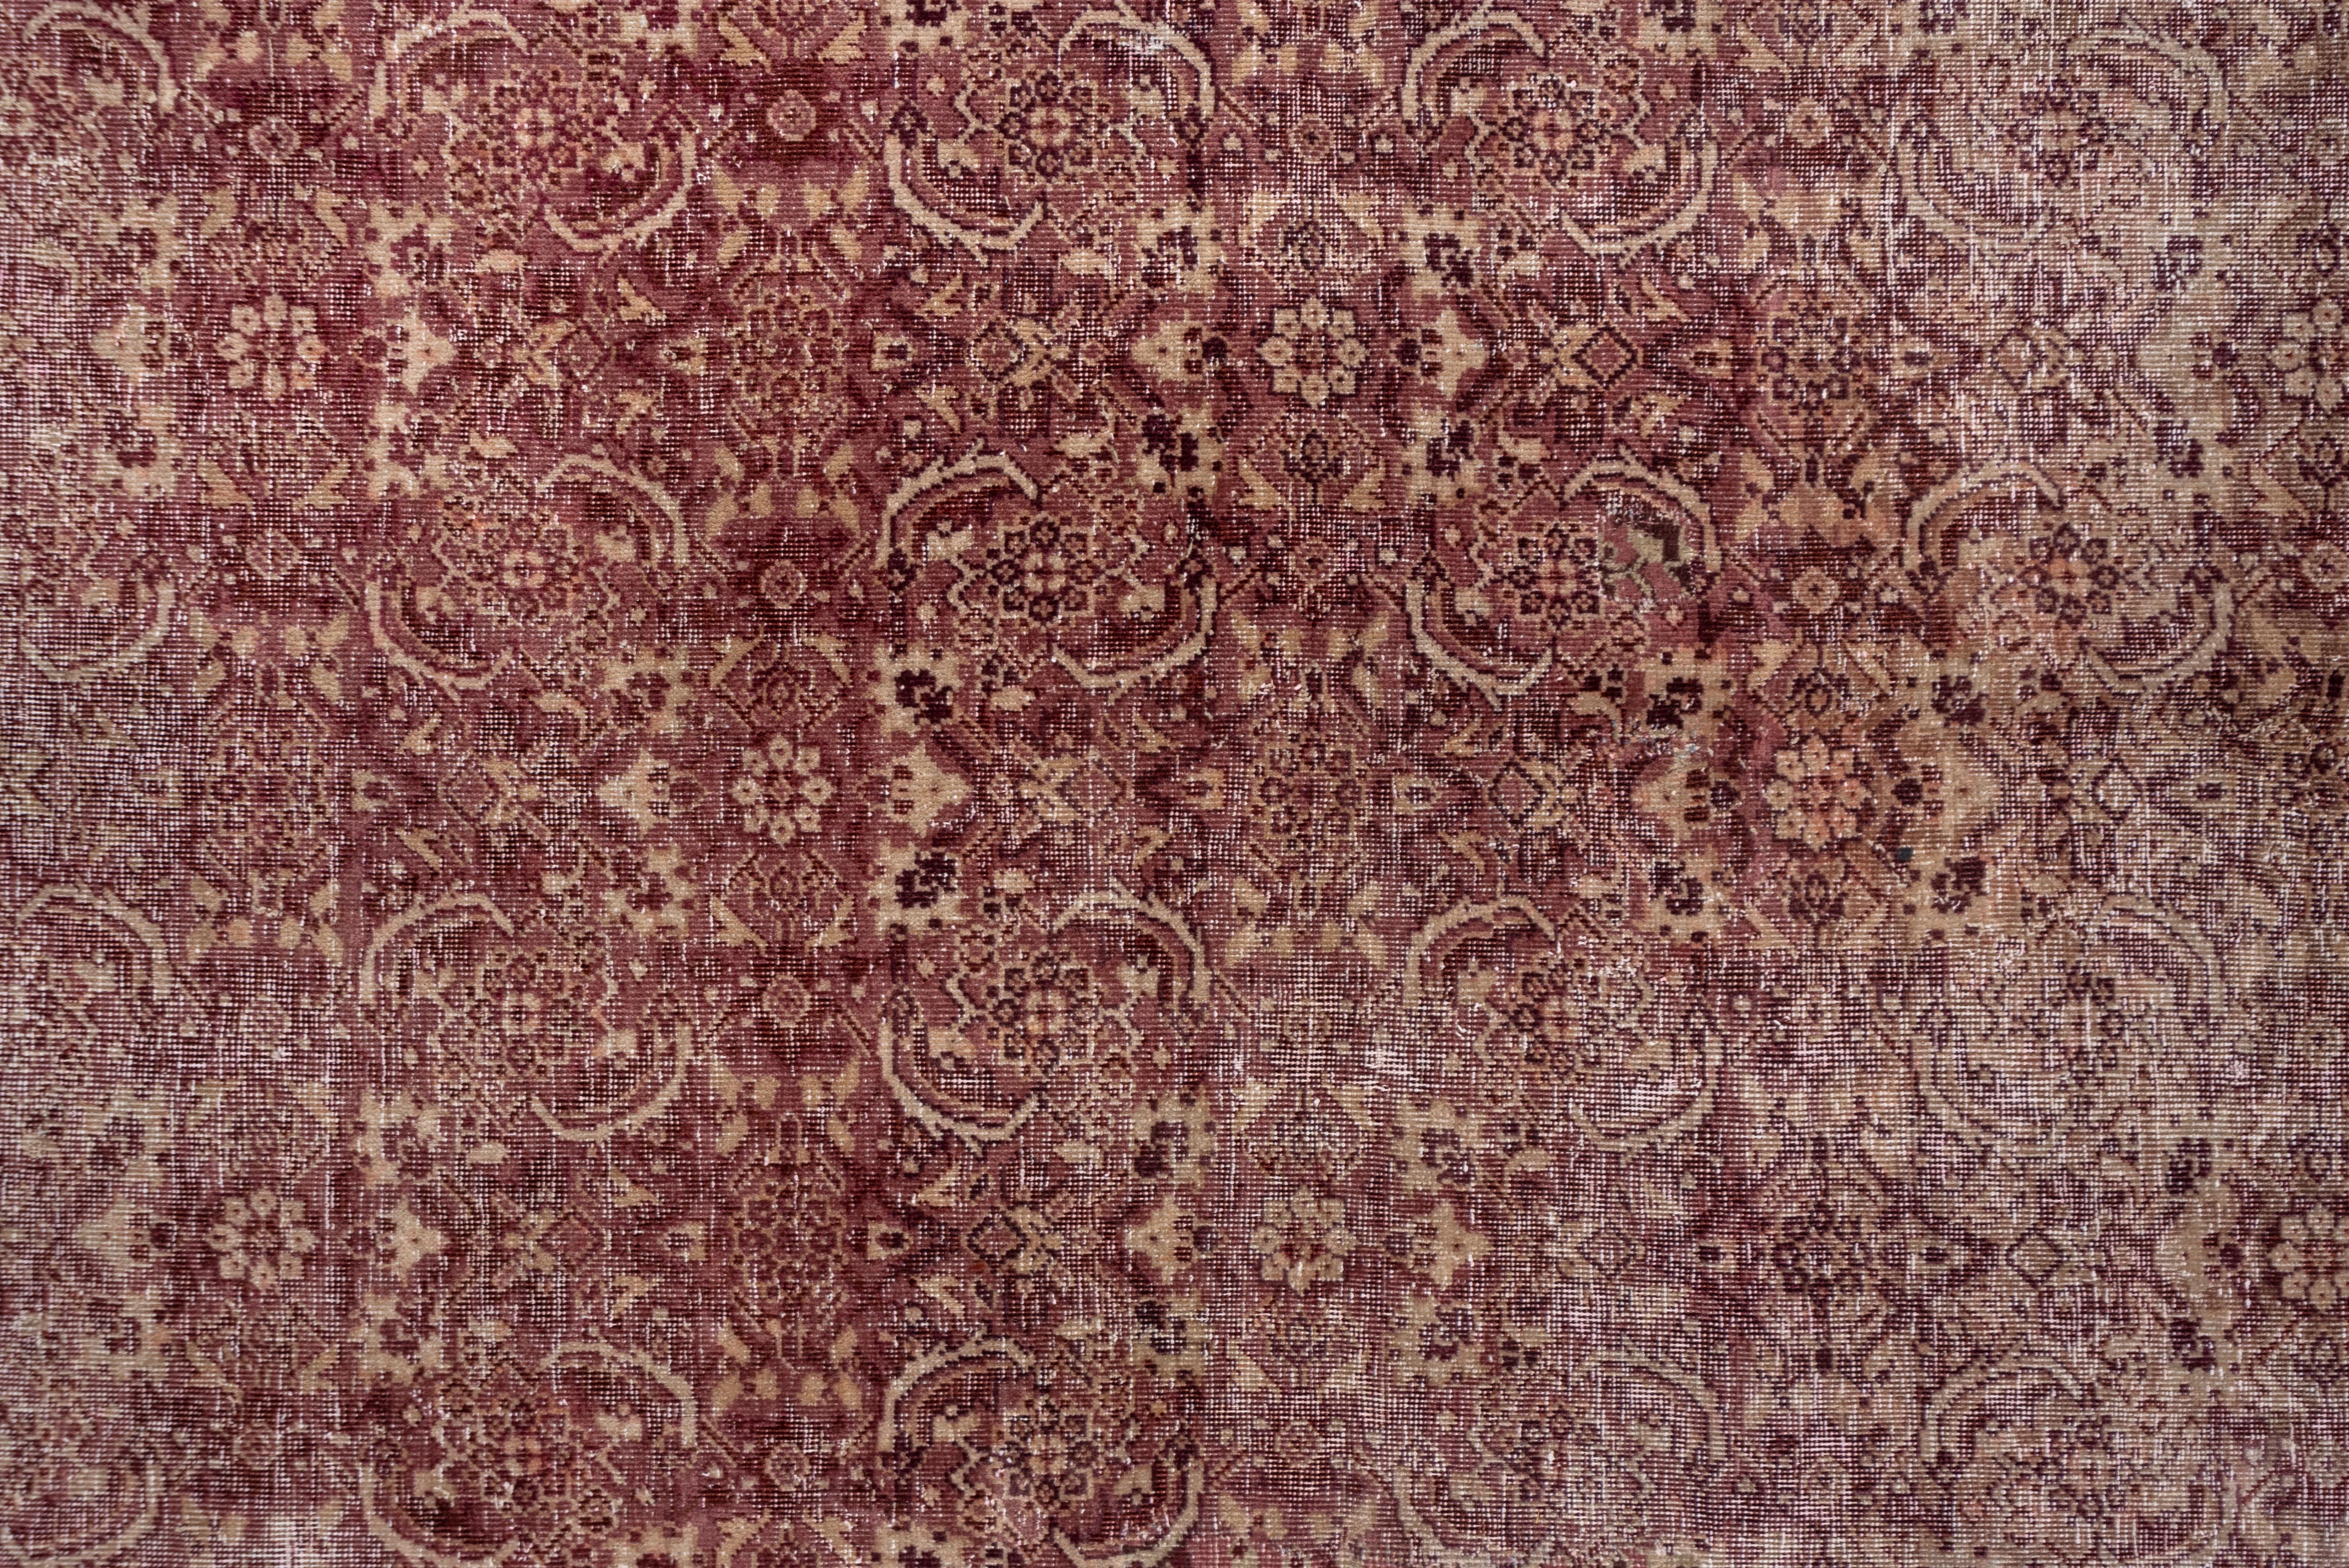 Early 20th Century Distressed Antique Indian Amritzar Rug, Burgundy and Brown Tones For Sale